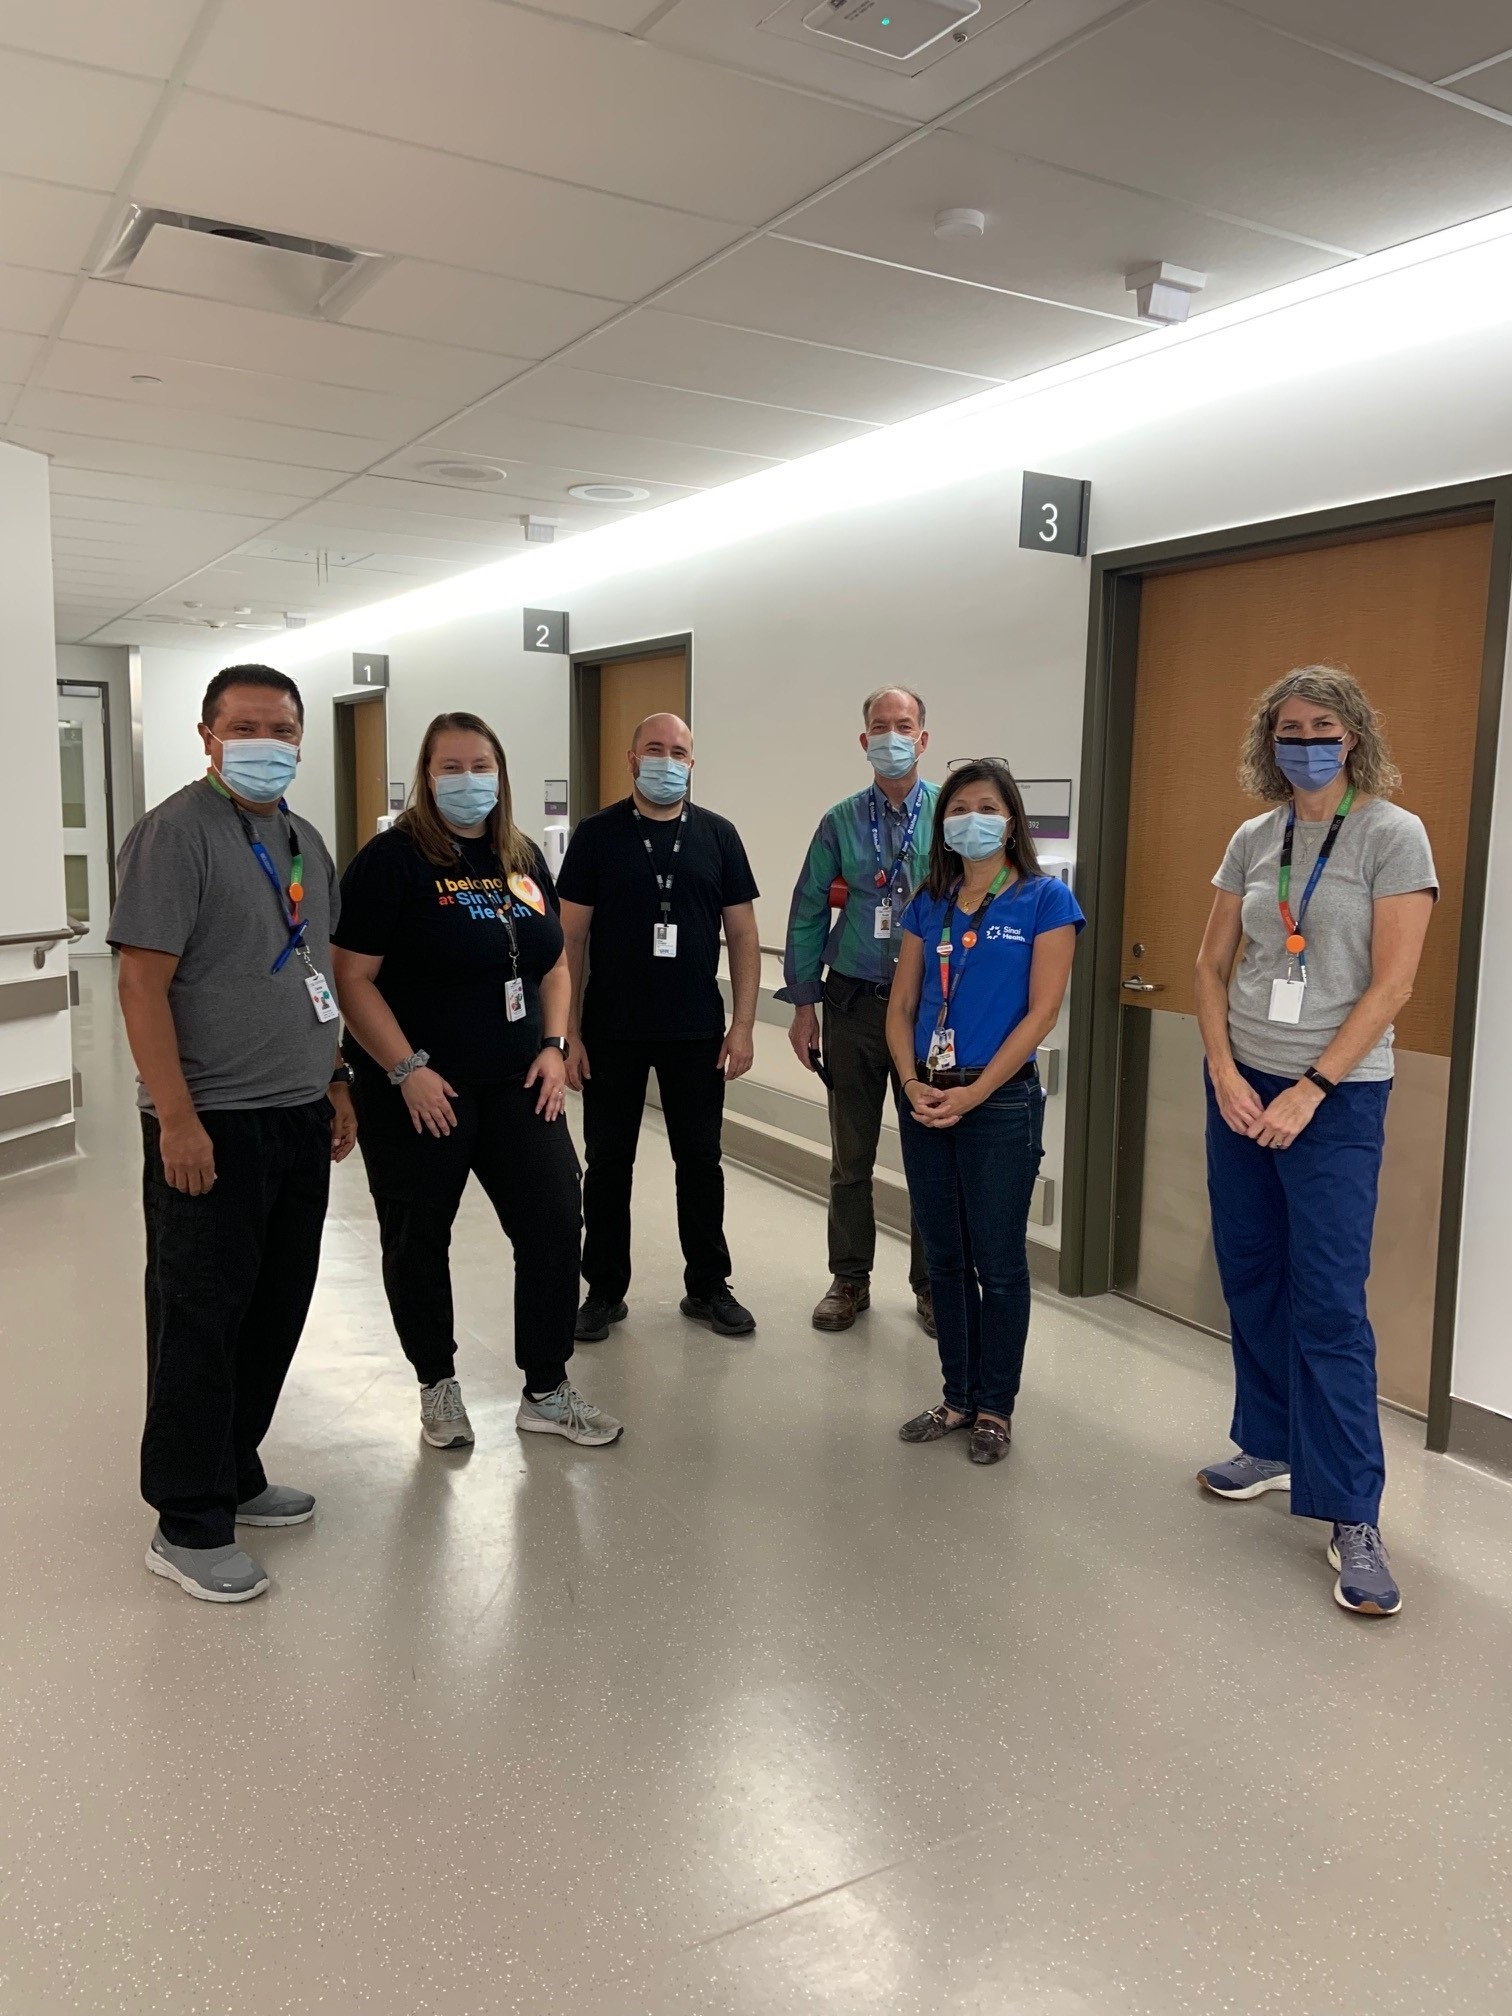 A group of people standing in a hall in a hospital. They are wearing masks and looking at the camera.